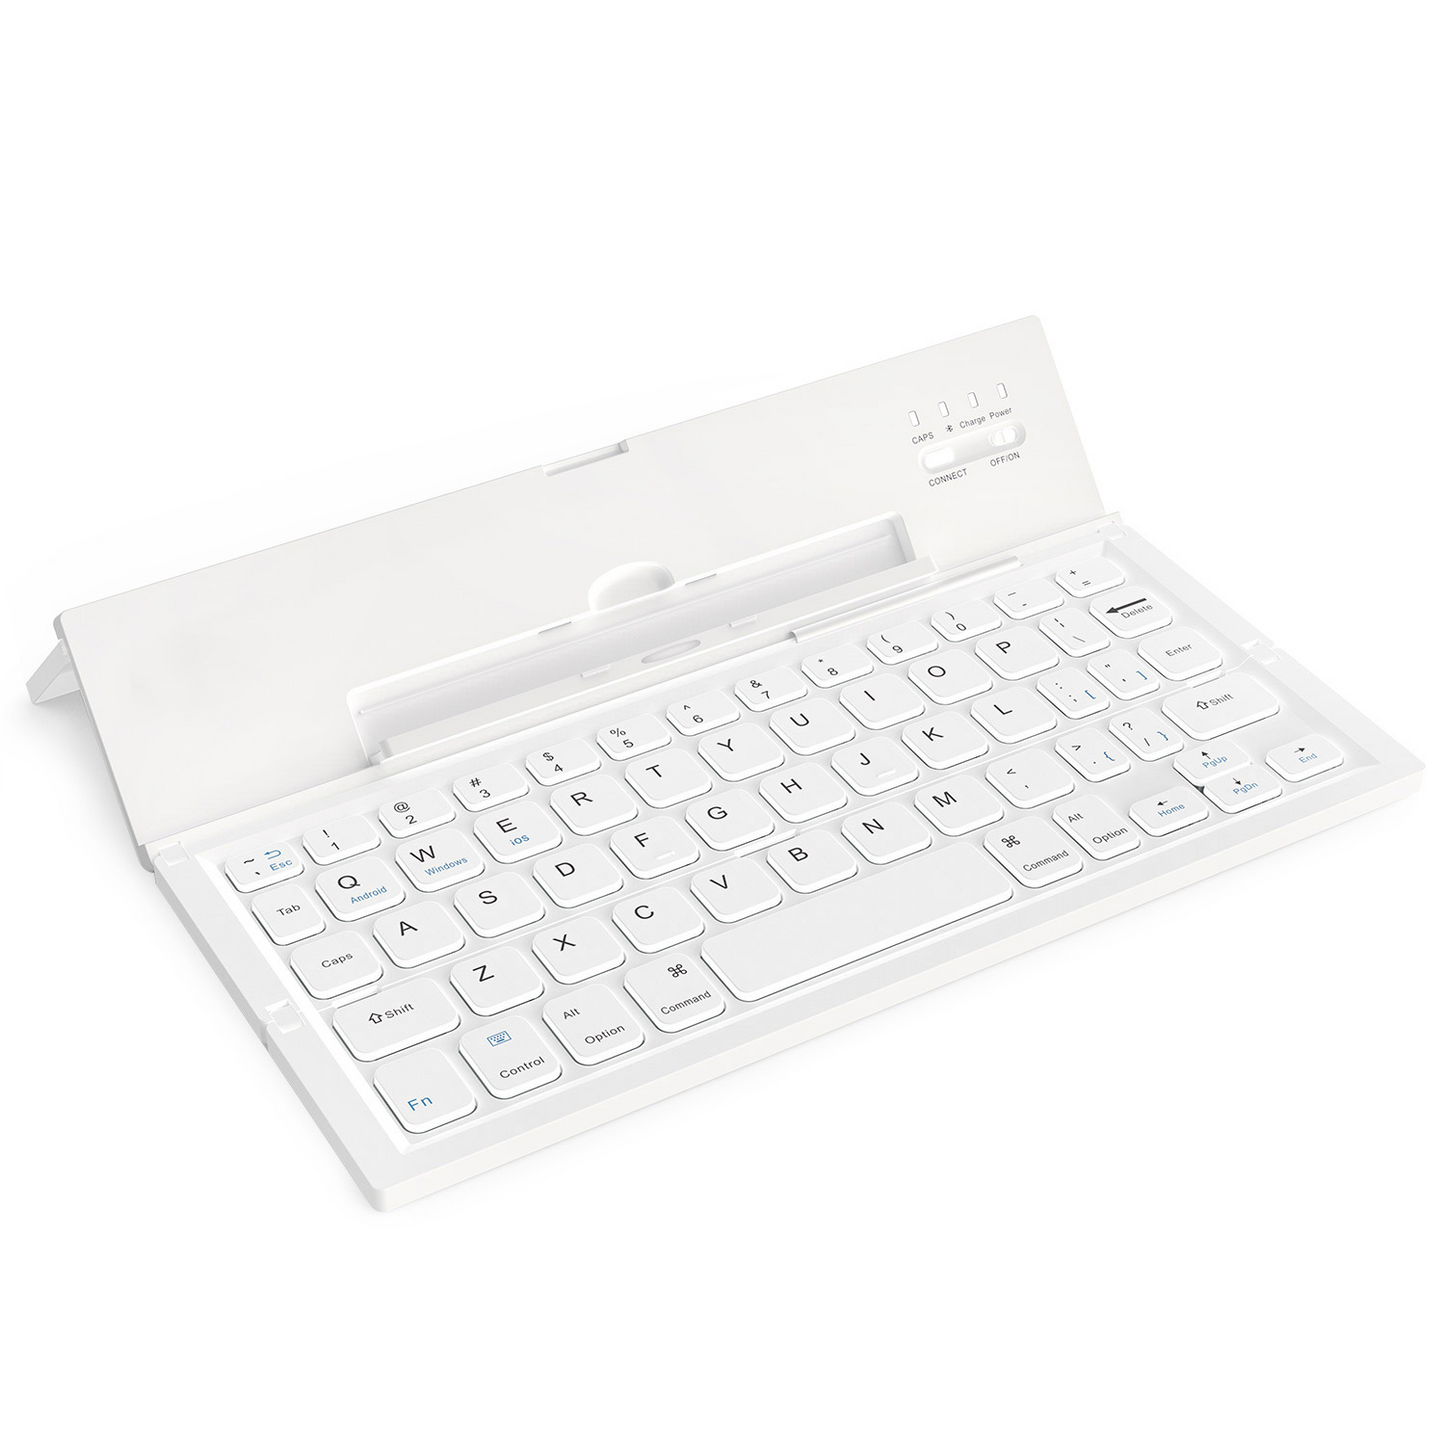 Wireless three-system Bluetooth folding keyboard for mobile phones and tablets Wireless mini keyboard